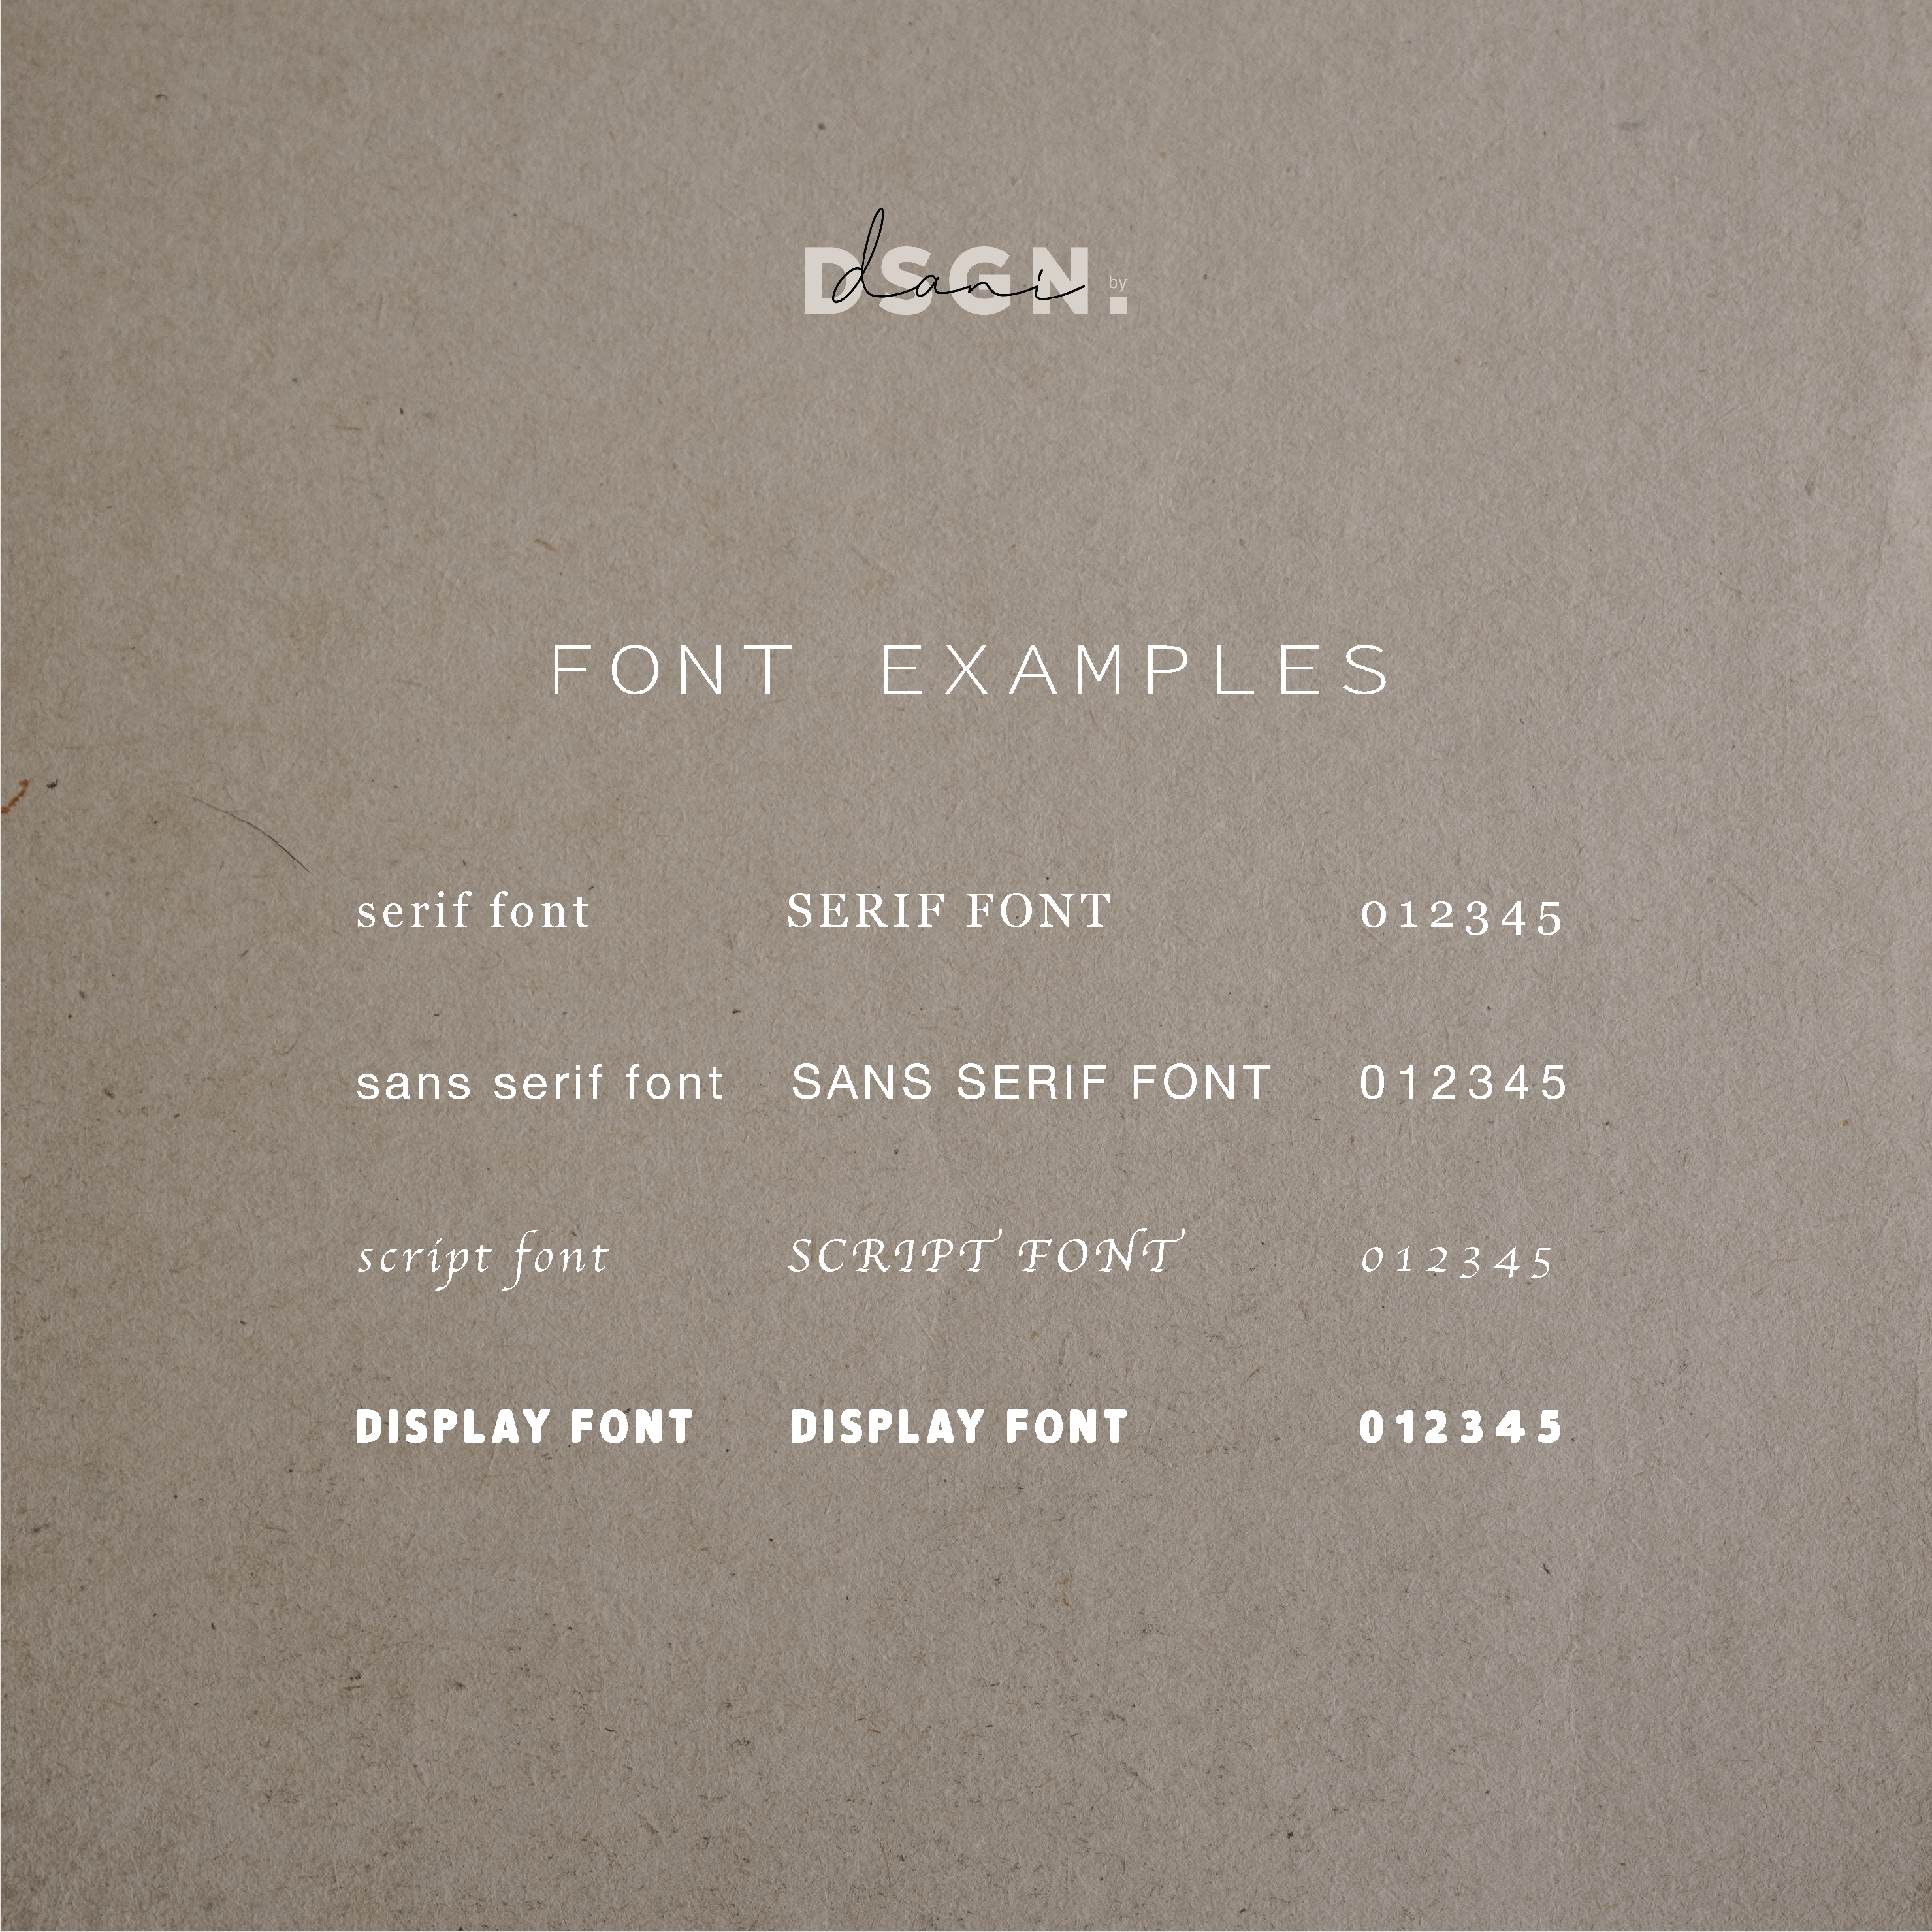 This slide shows examples of free-to-use font options which are accessible to our clients.